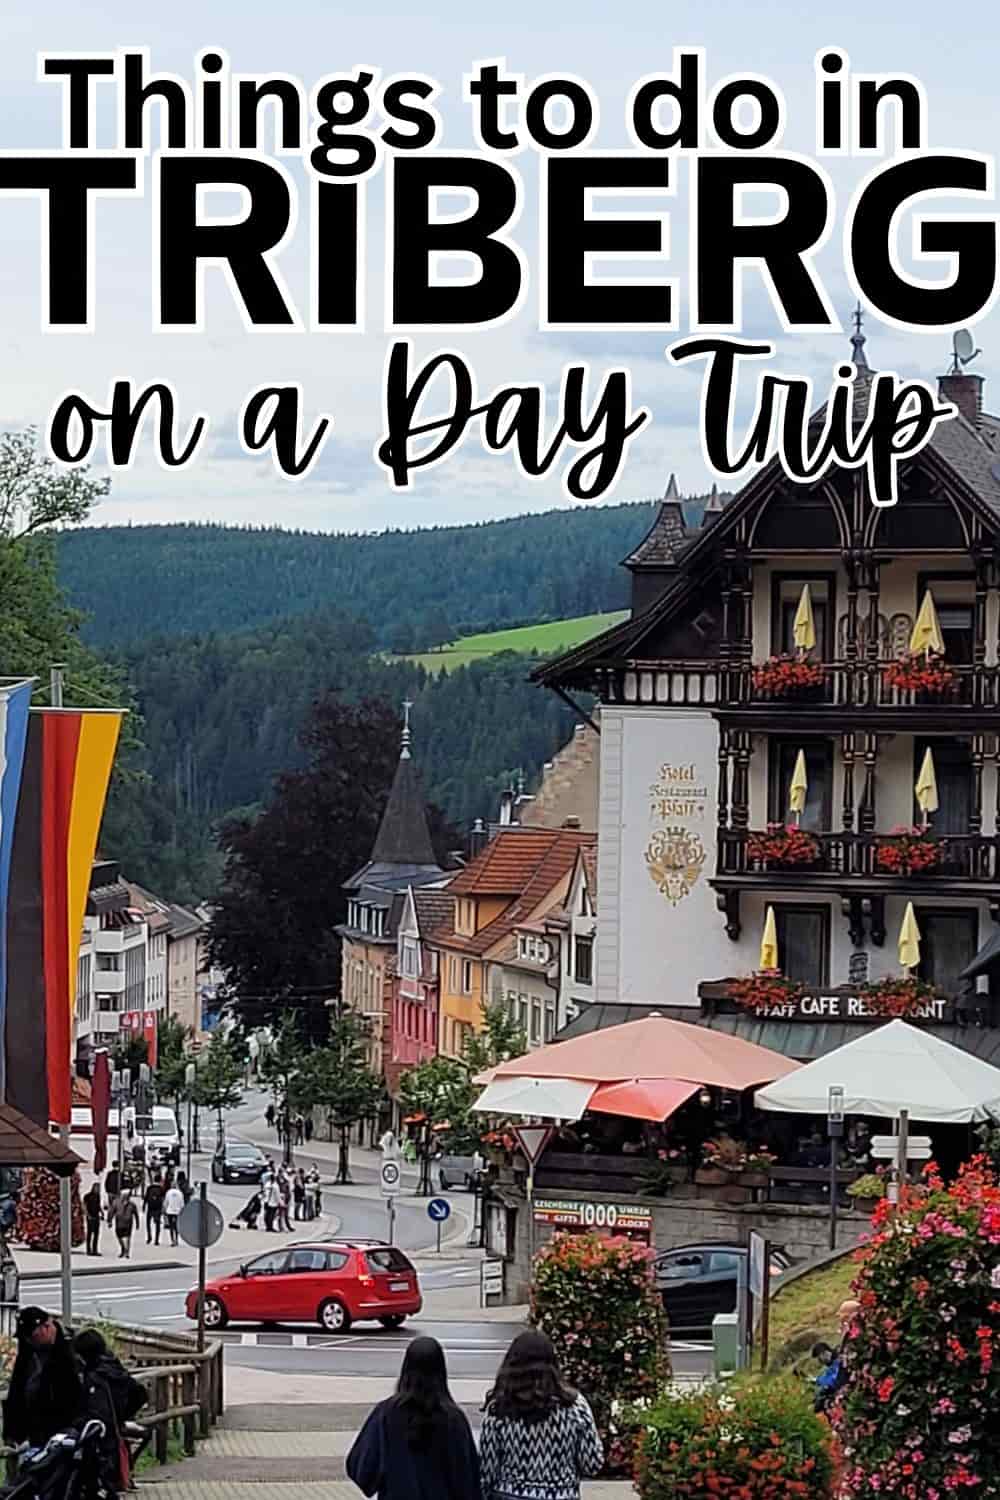 Things to do in Triberg, Germany on a Day Trip